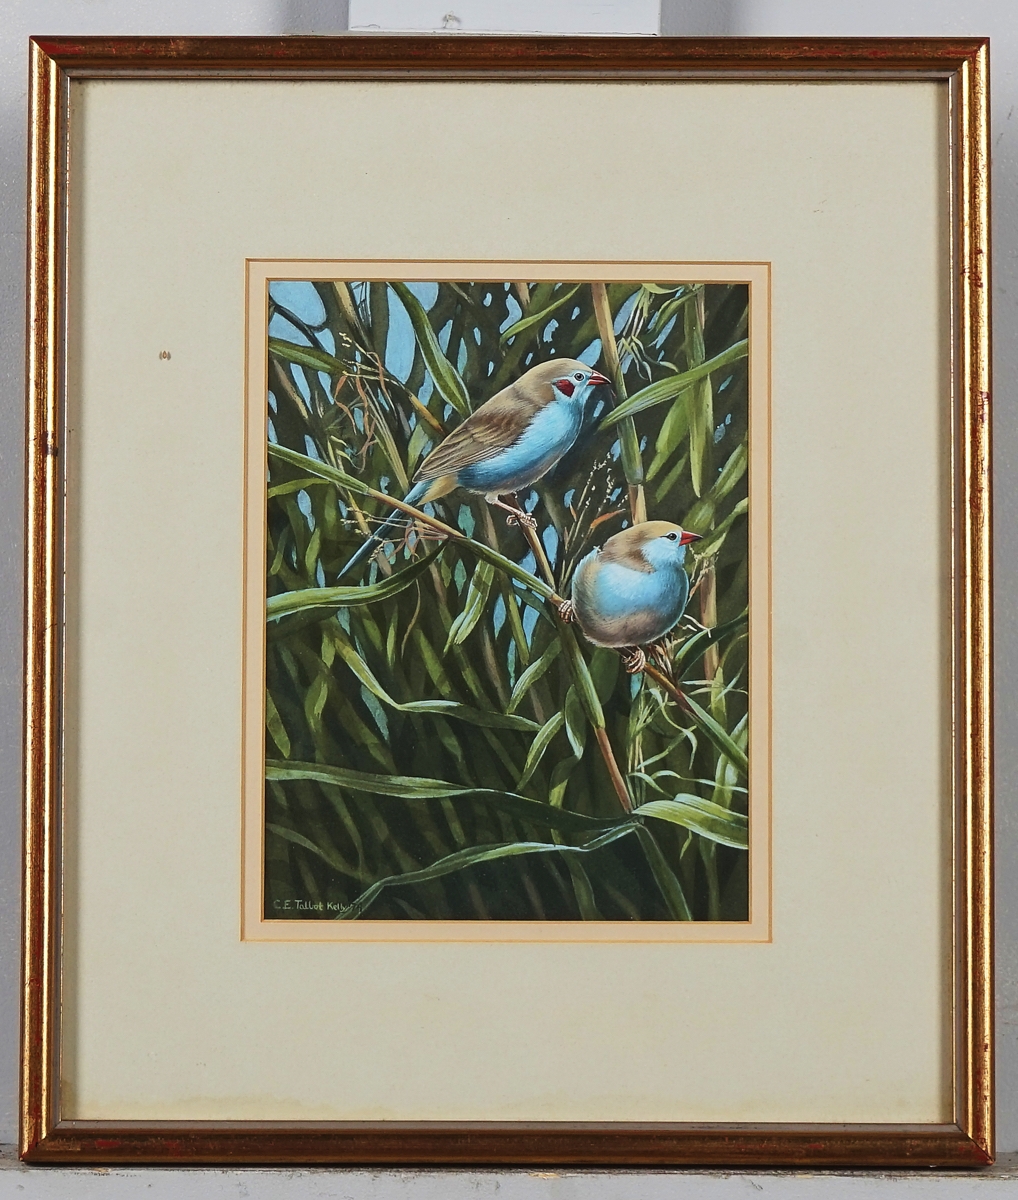 Artwork by Chloë Talbot-Kelly, Red-Cheeked Cordon Bleu, Made of watercolour and bodycolour